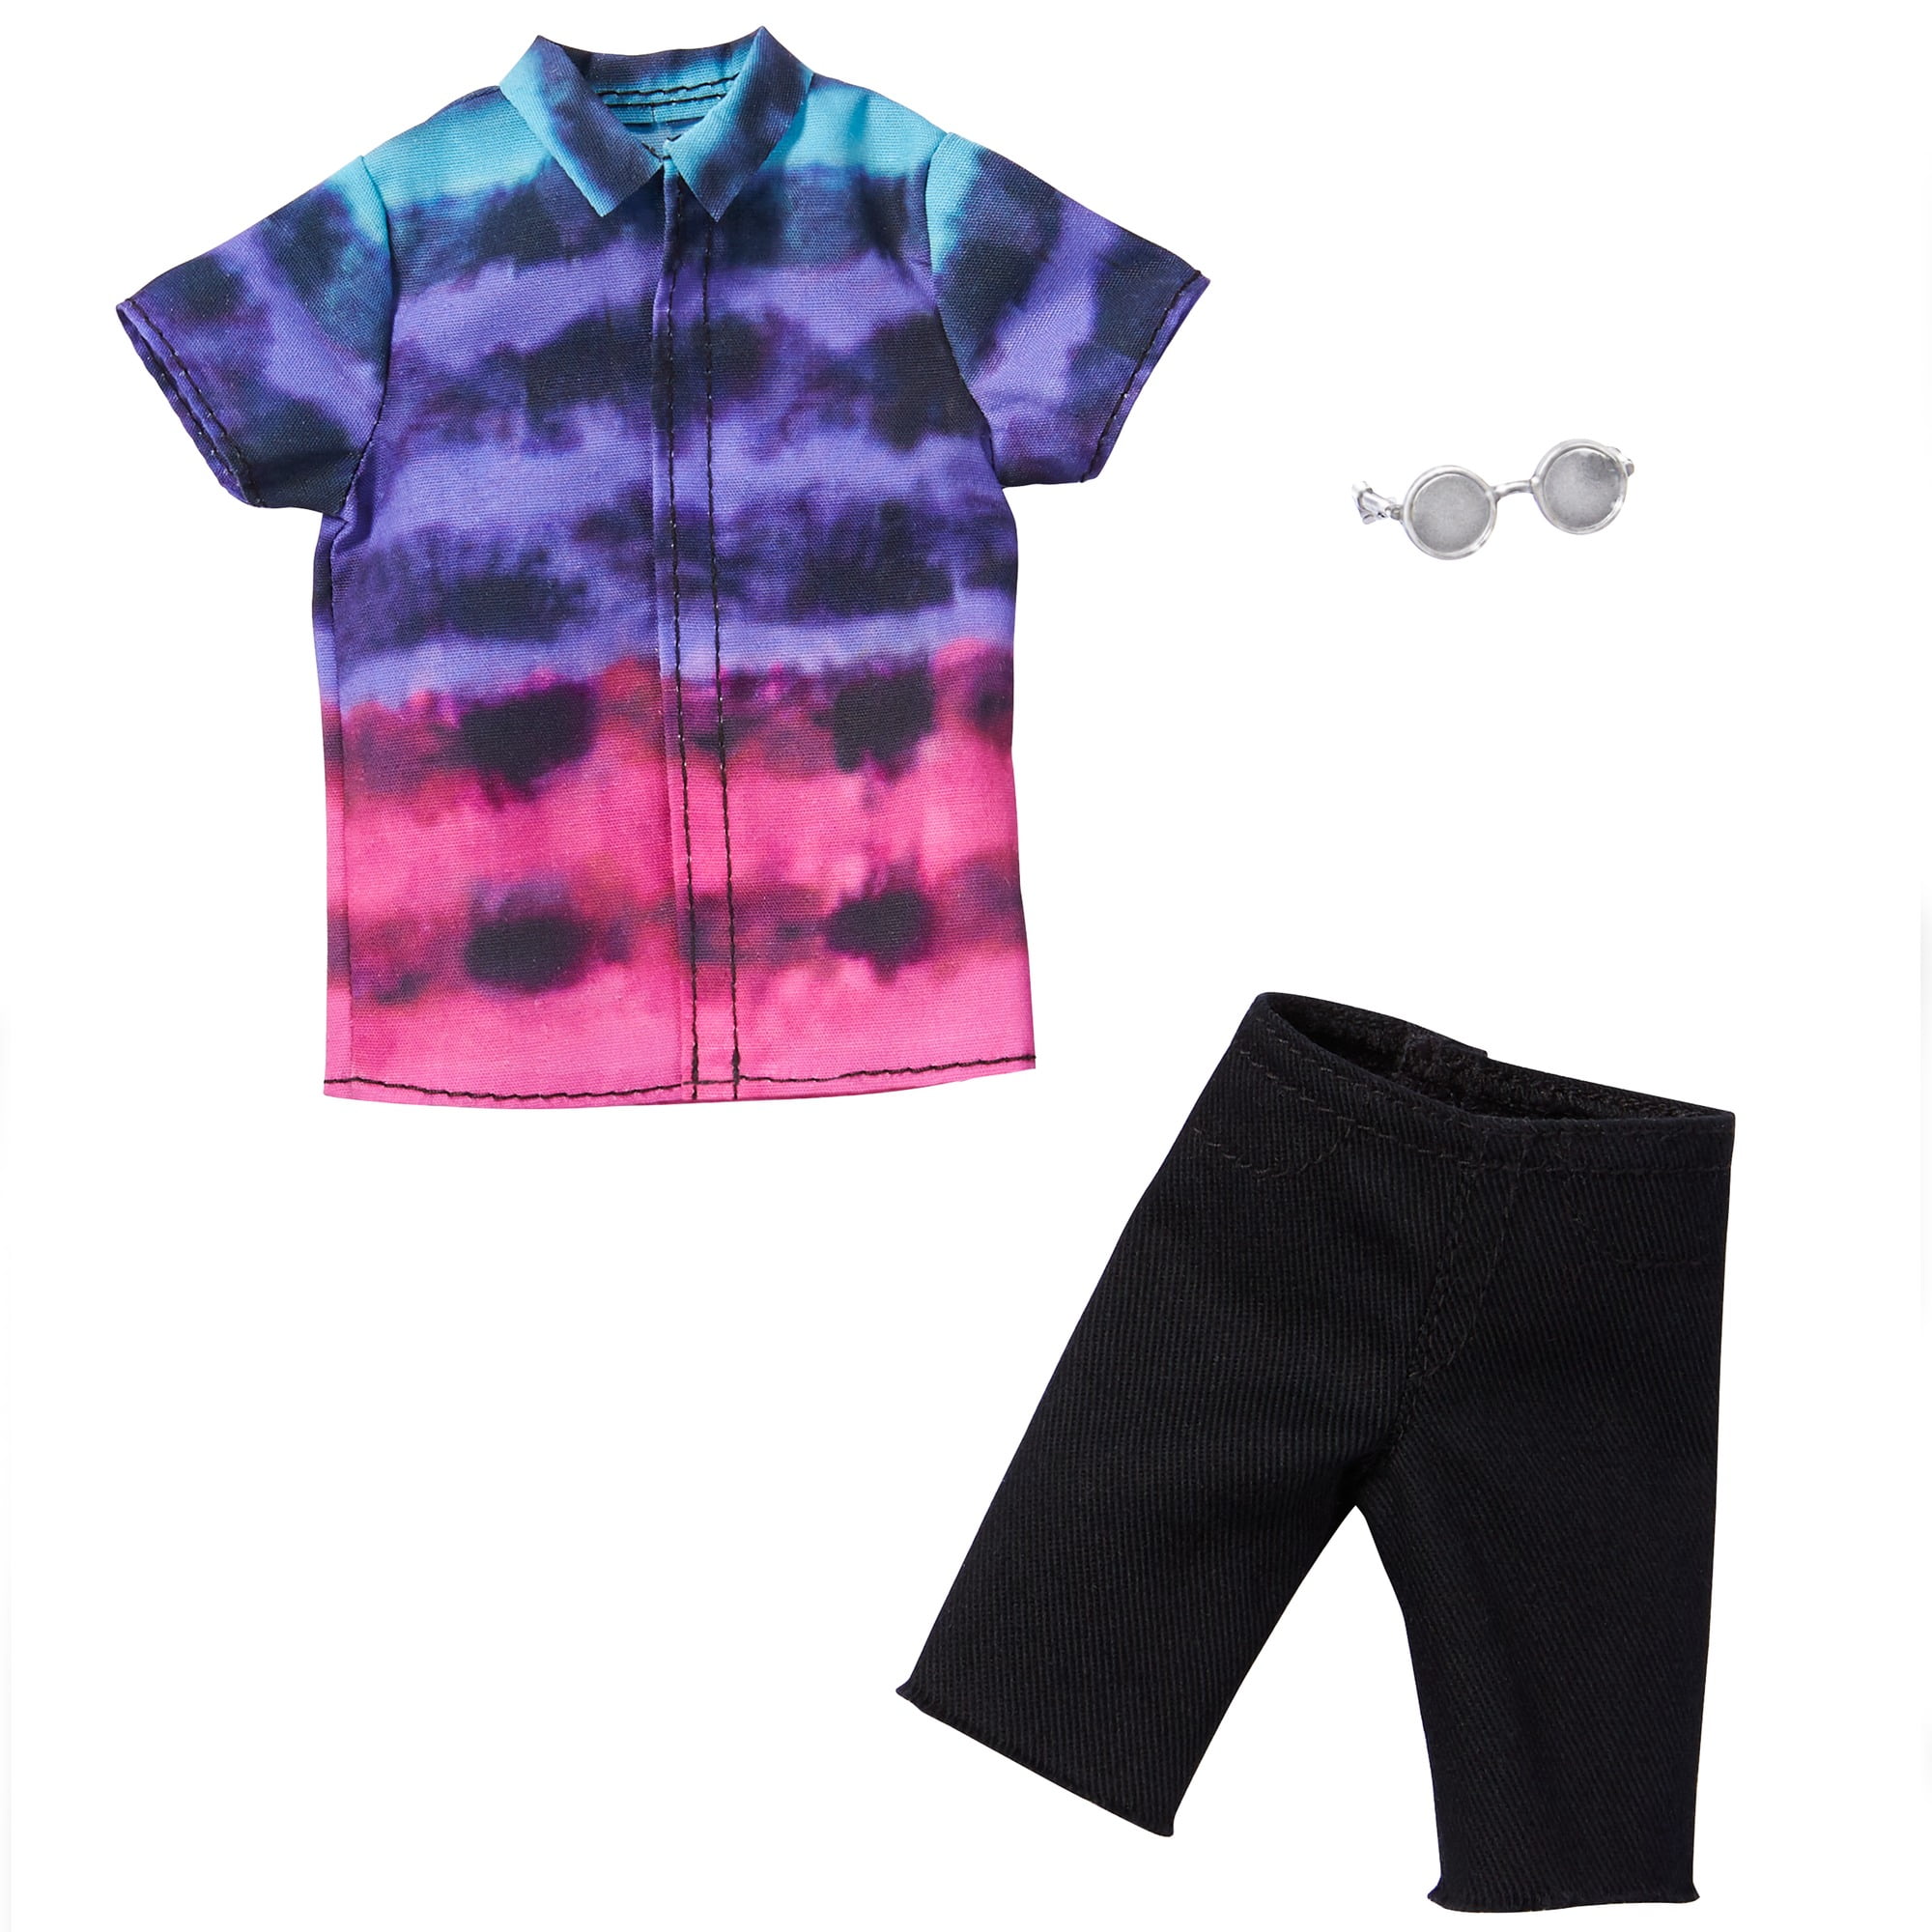 Barbie Fashions Pack: Ken Doll Clothes With Tie-Dye Shirt, Black Shorts &  Round Sunglasses